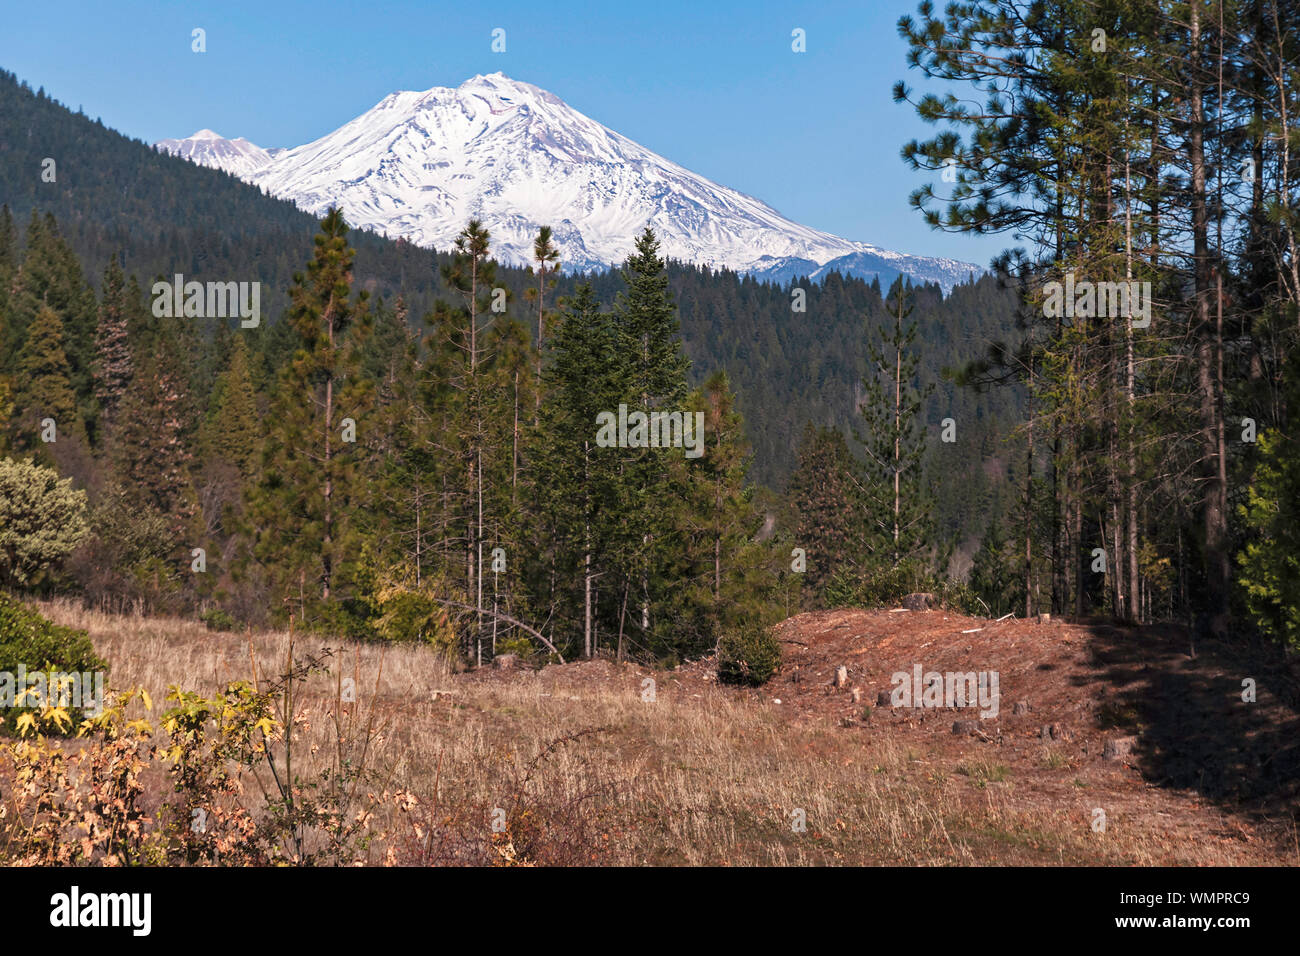 mt shasta volcano viewed from the vista point on interstate 5 highway near Castella California with forests and a meadow in the foreground Stock Photo